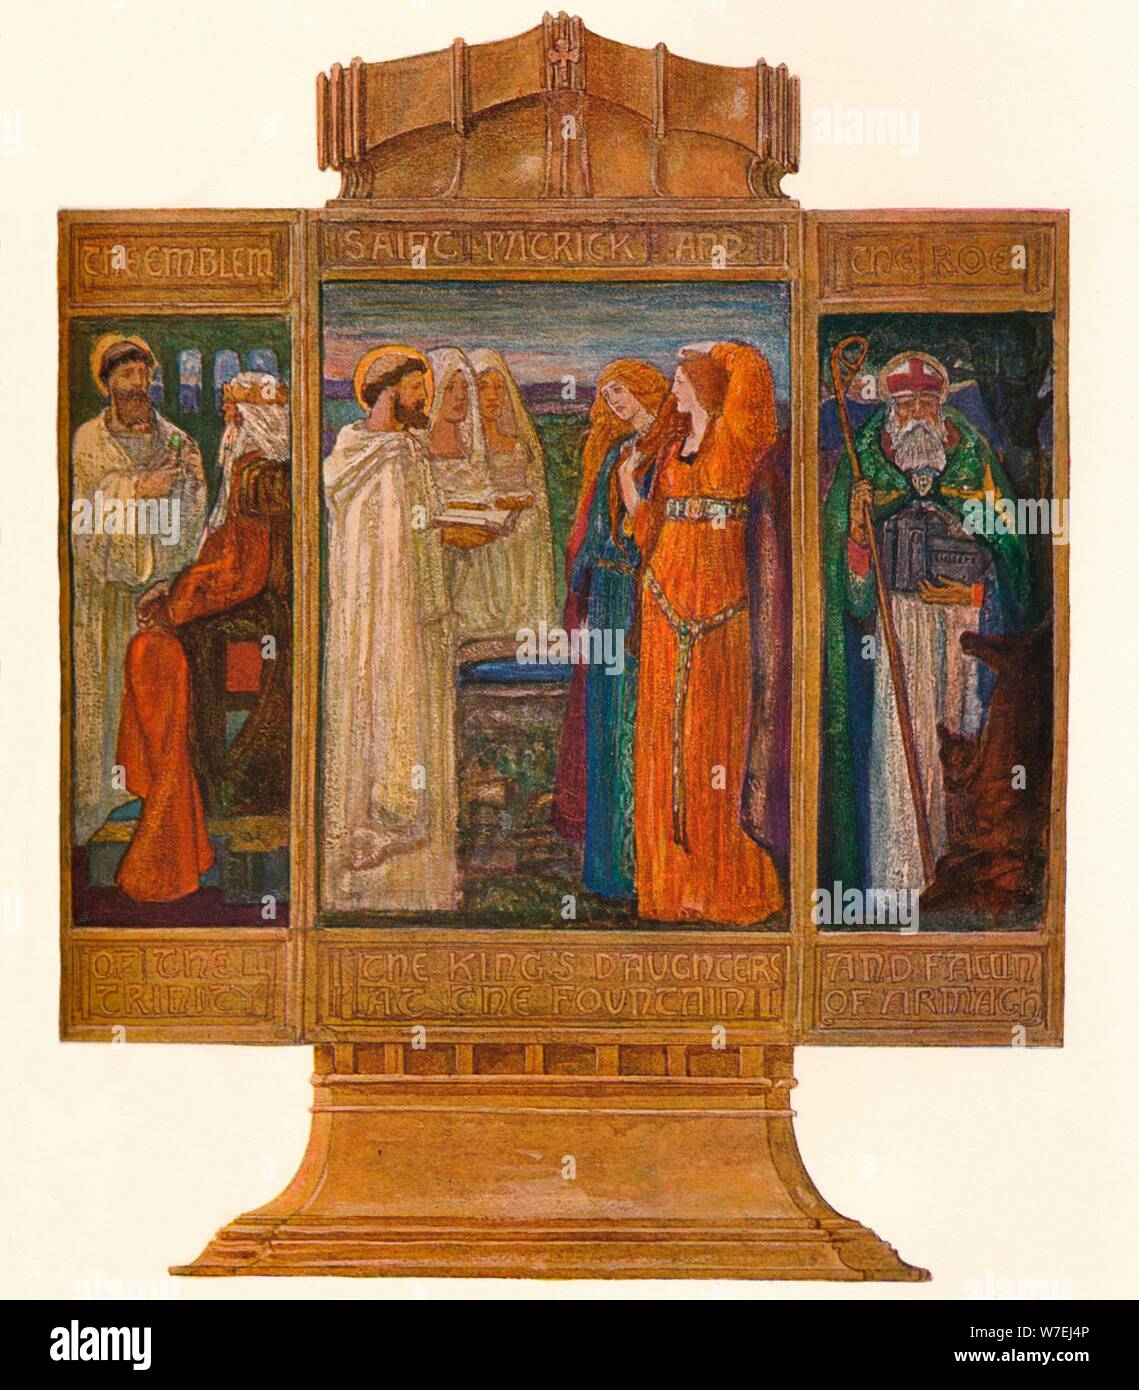 Triptych in Painted enamels: Scenes from the life of St. Patrick, 1903. Artist: Alexander Fisher Stock Photo